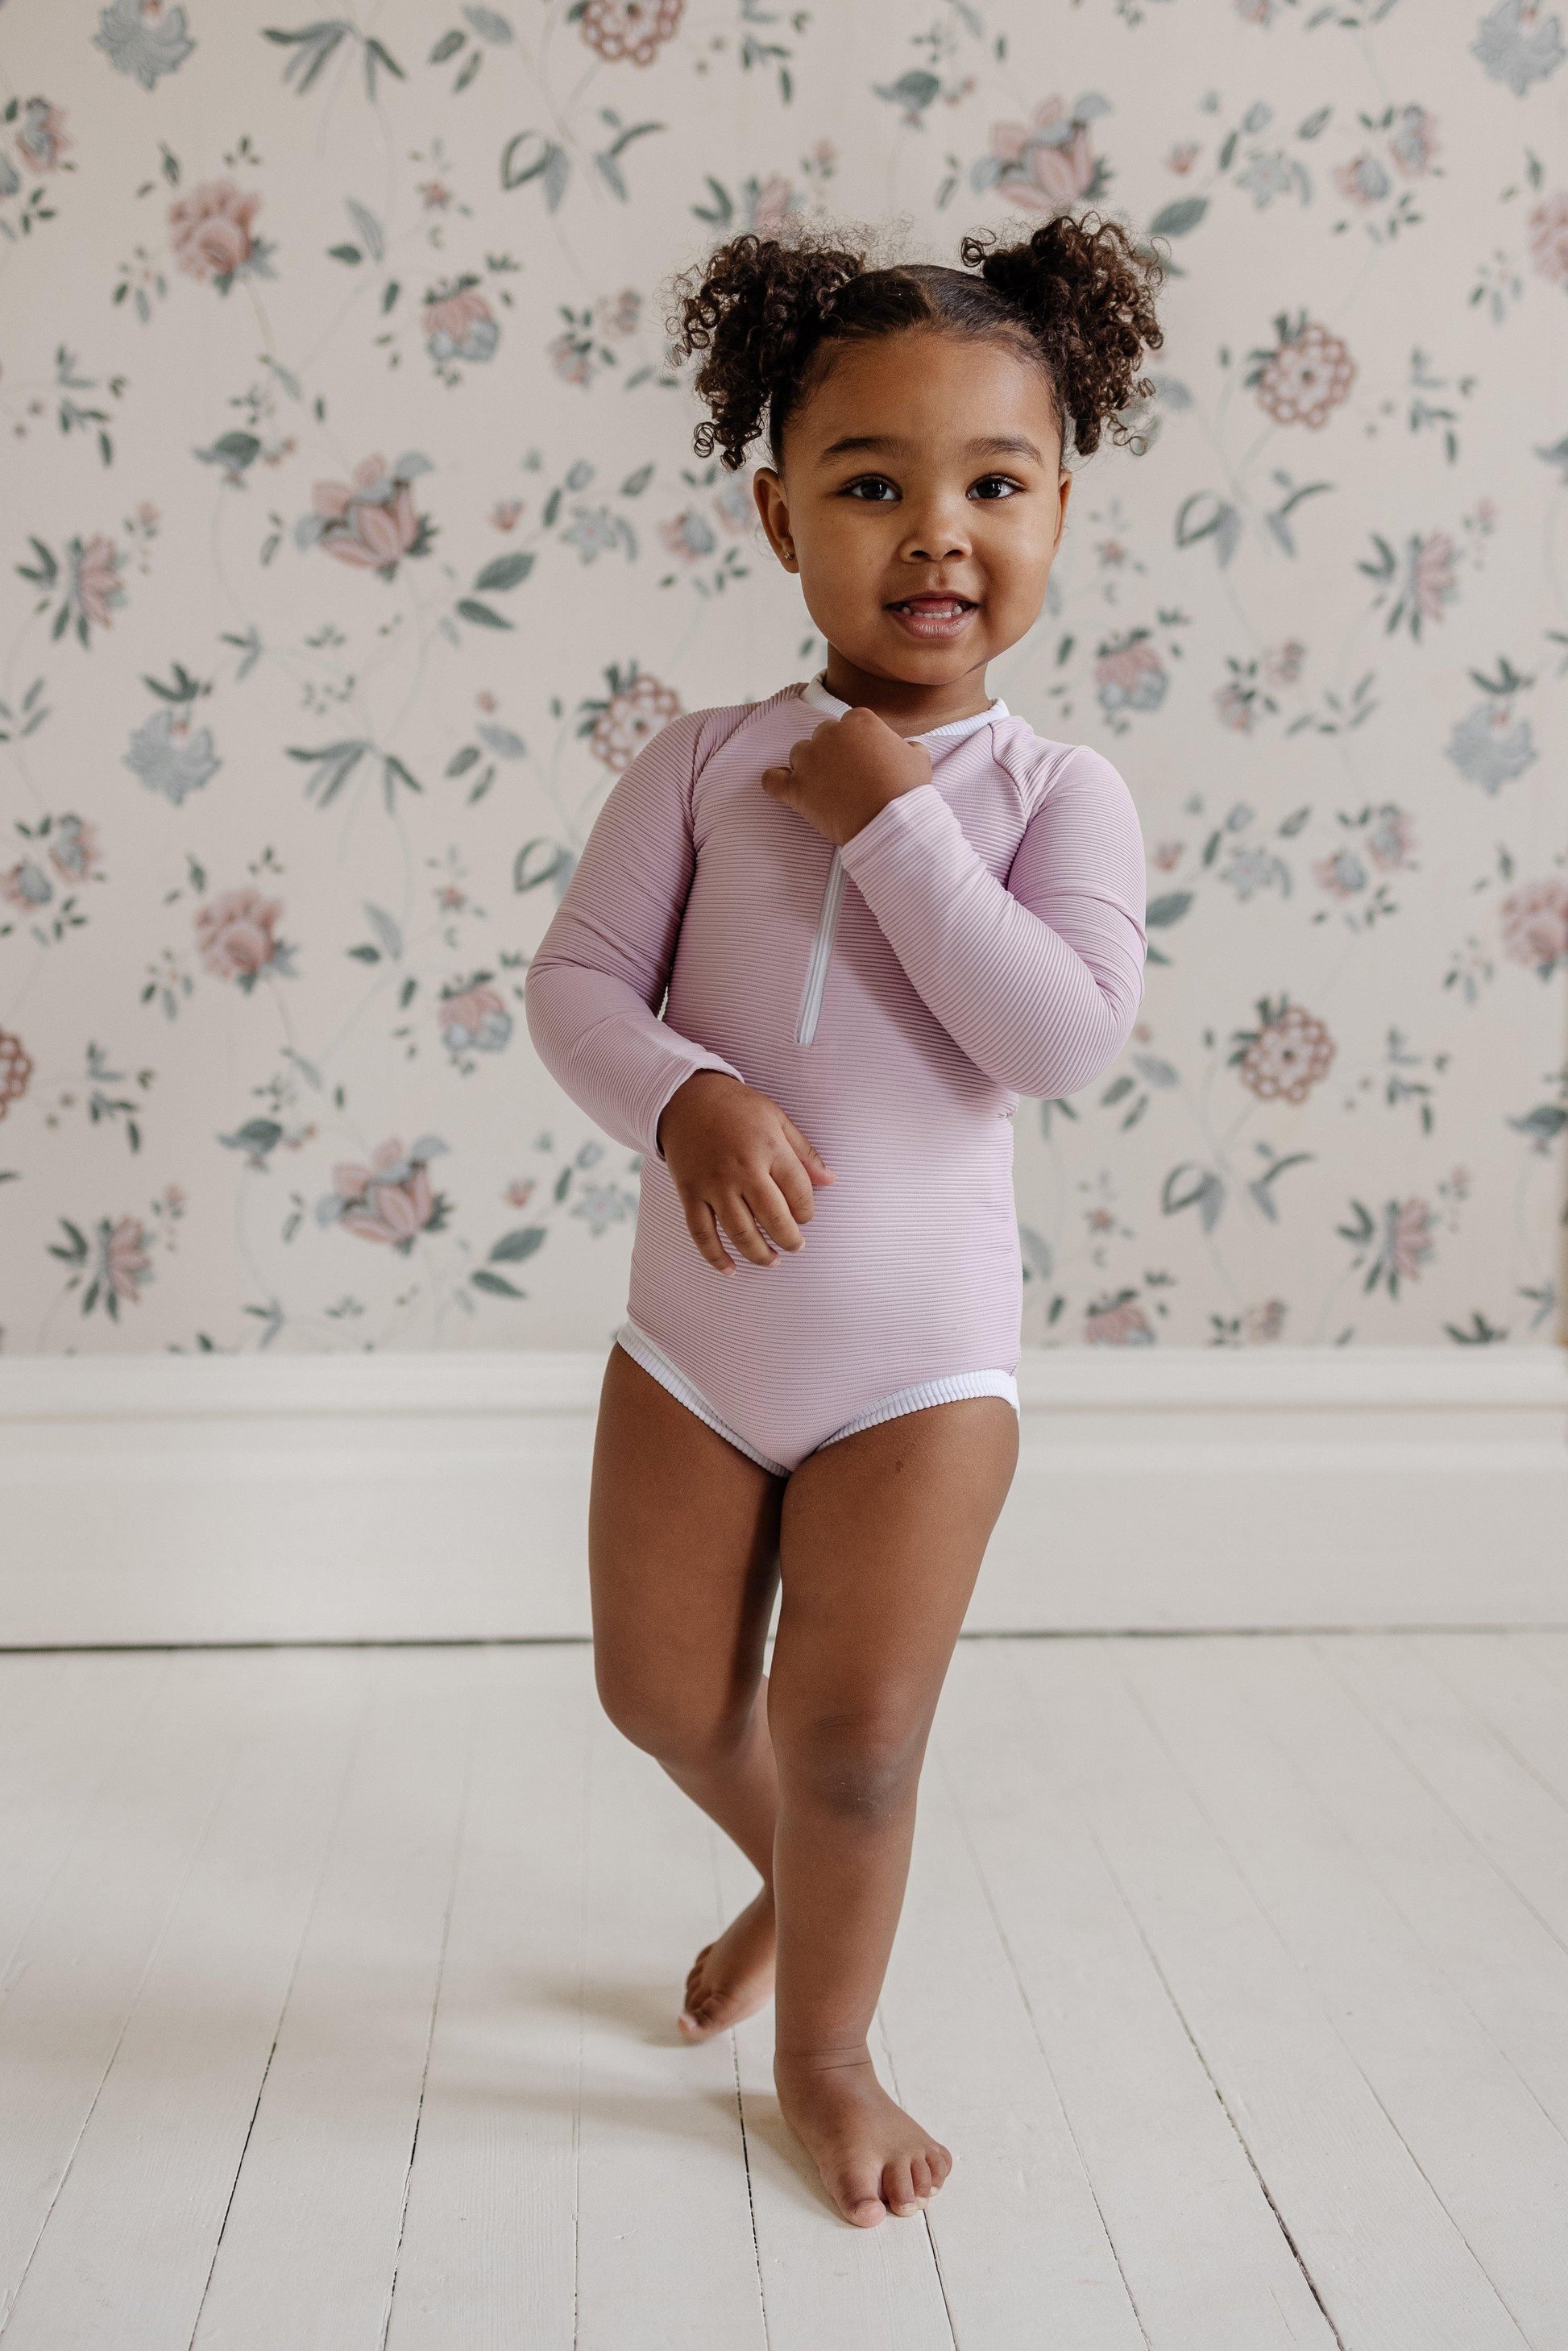 Fin & Vince Onesie Swimsuit - Multiple Colors Available - Turquoise, LLC